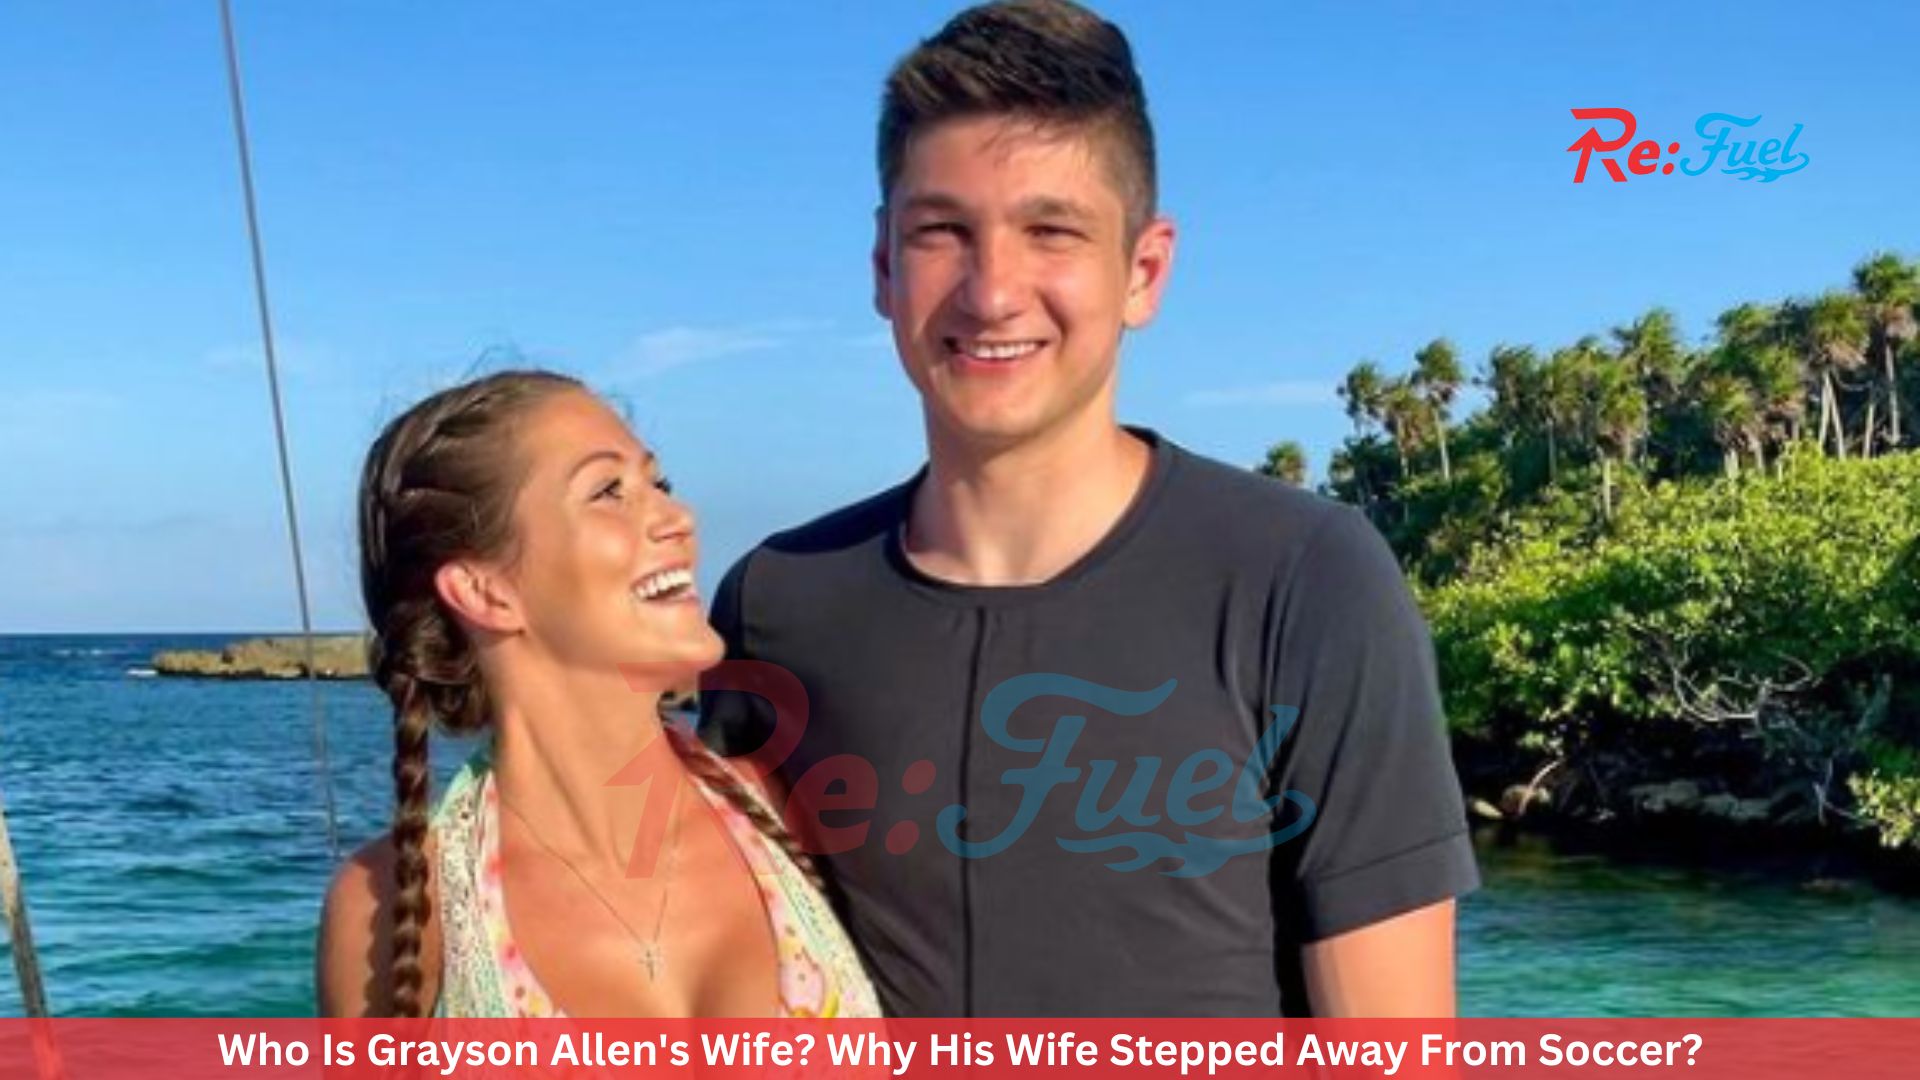 Who Is Grayson Allen's Wife? Why His Wife Stepped Away From Soccer?